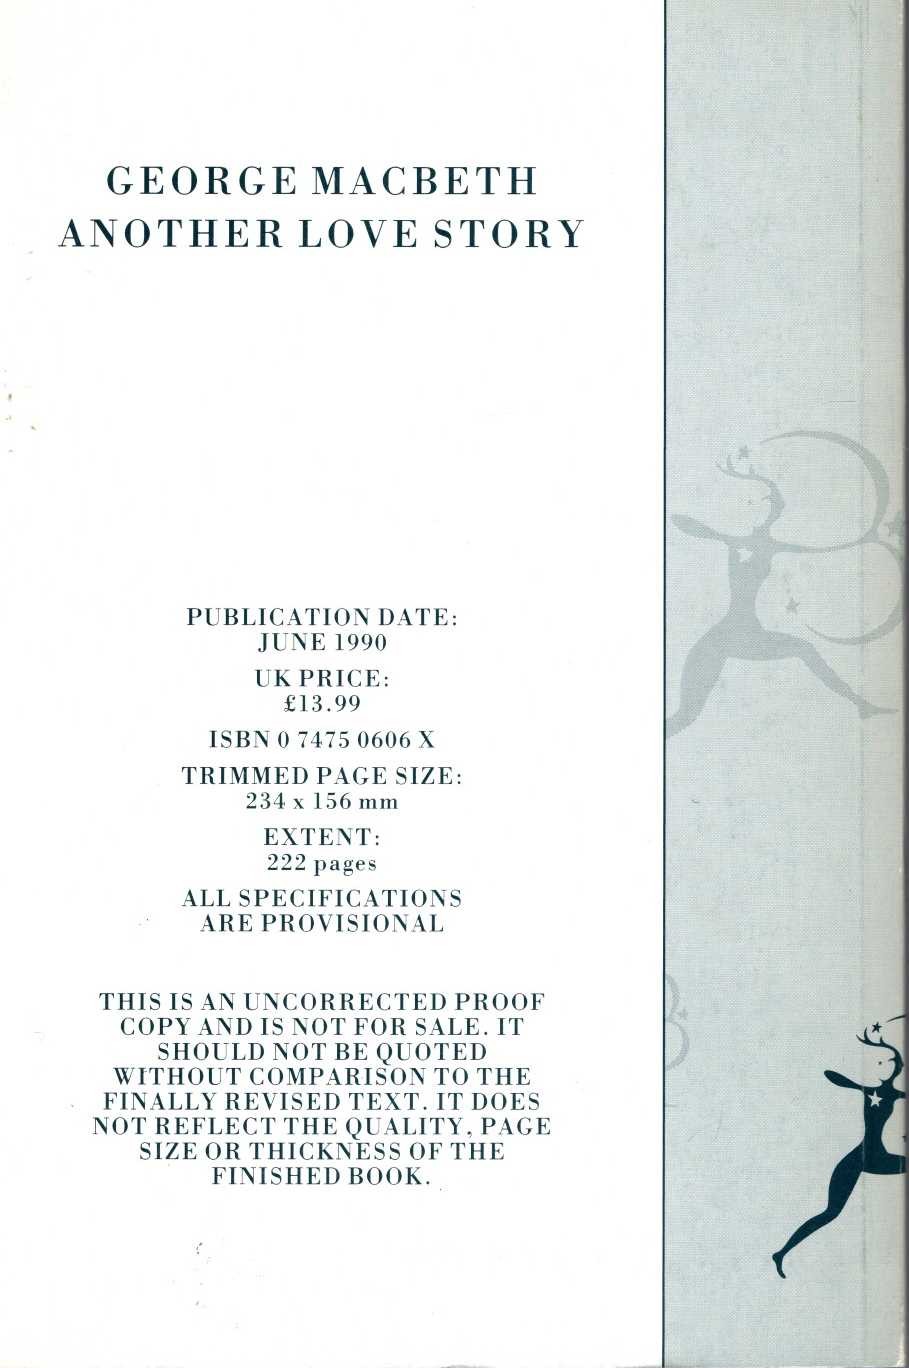 ANOTHER LOVE STORY magnified rear book cover image